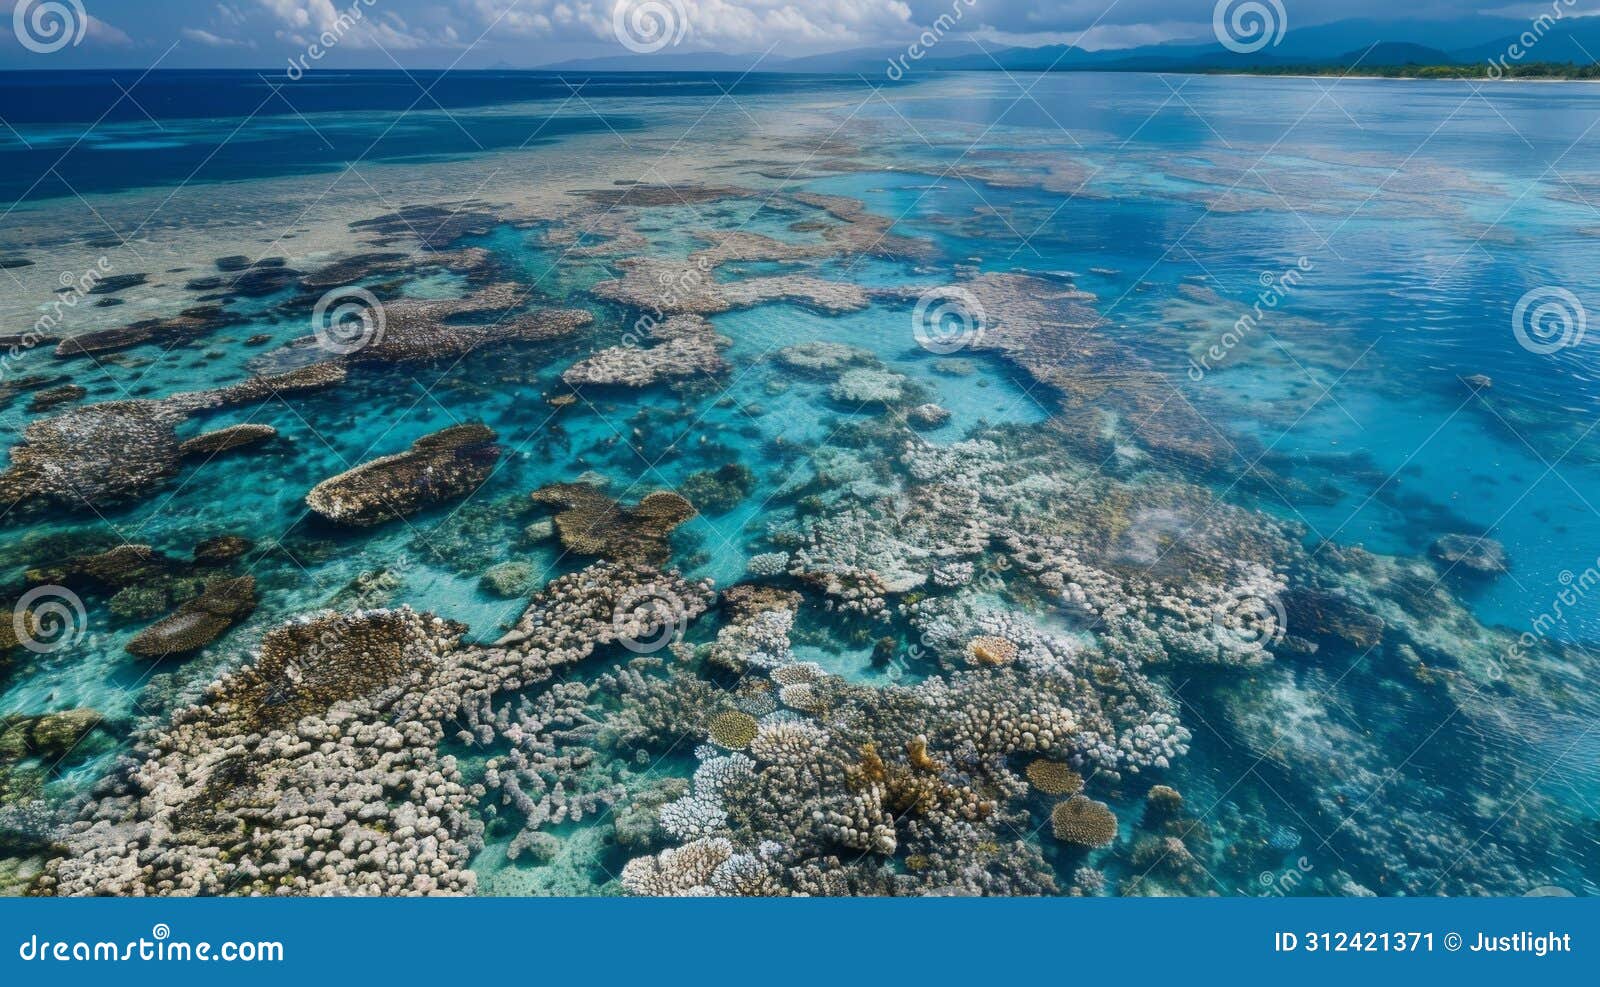 a birds eye view of a vast and eerie expanse of bleached coral a disastrous scene caused by rising ocean temperatures